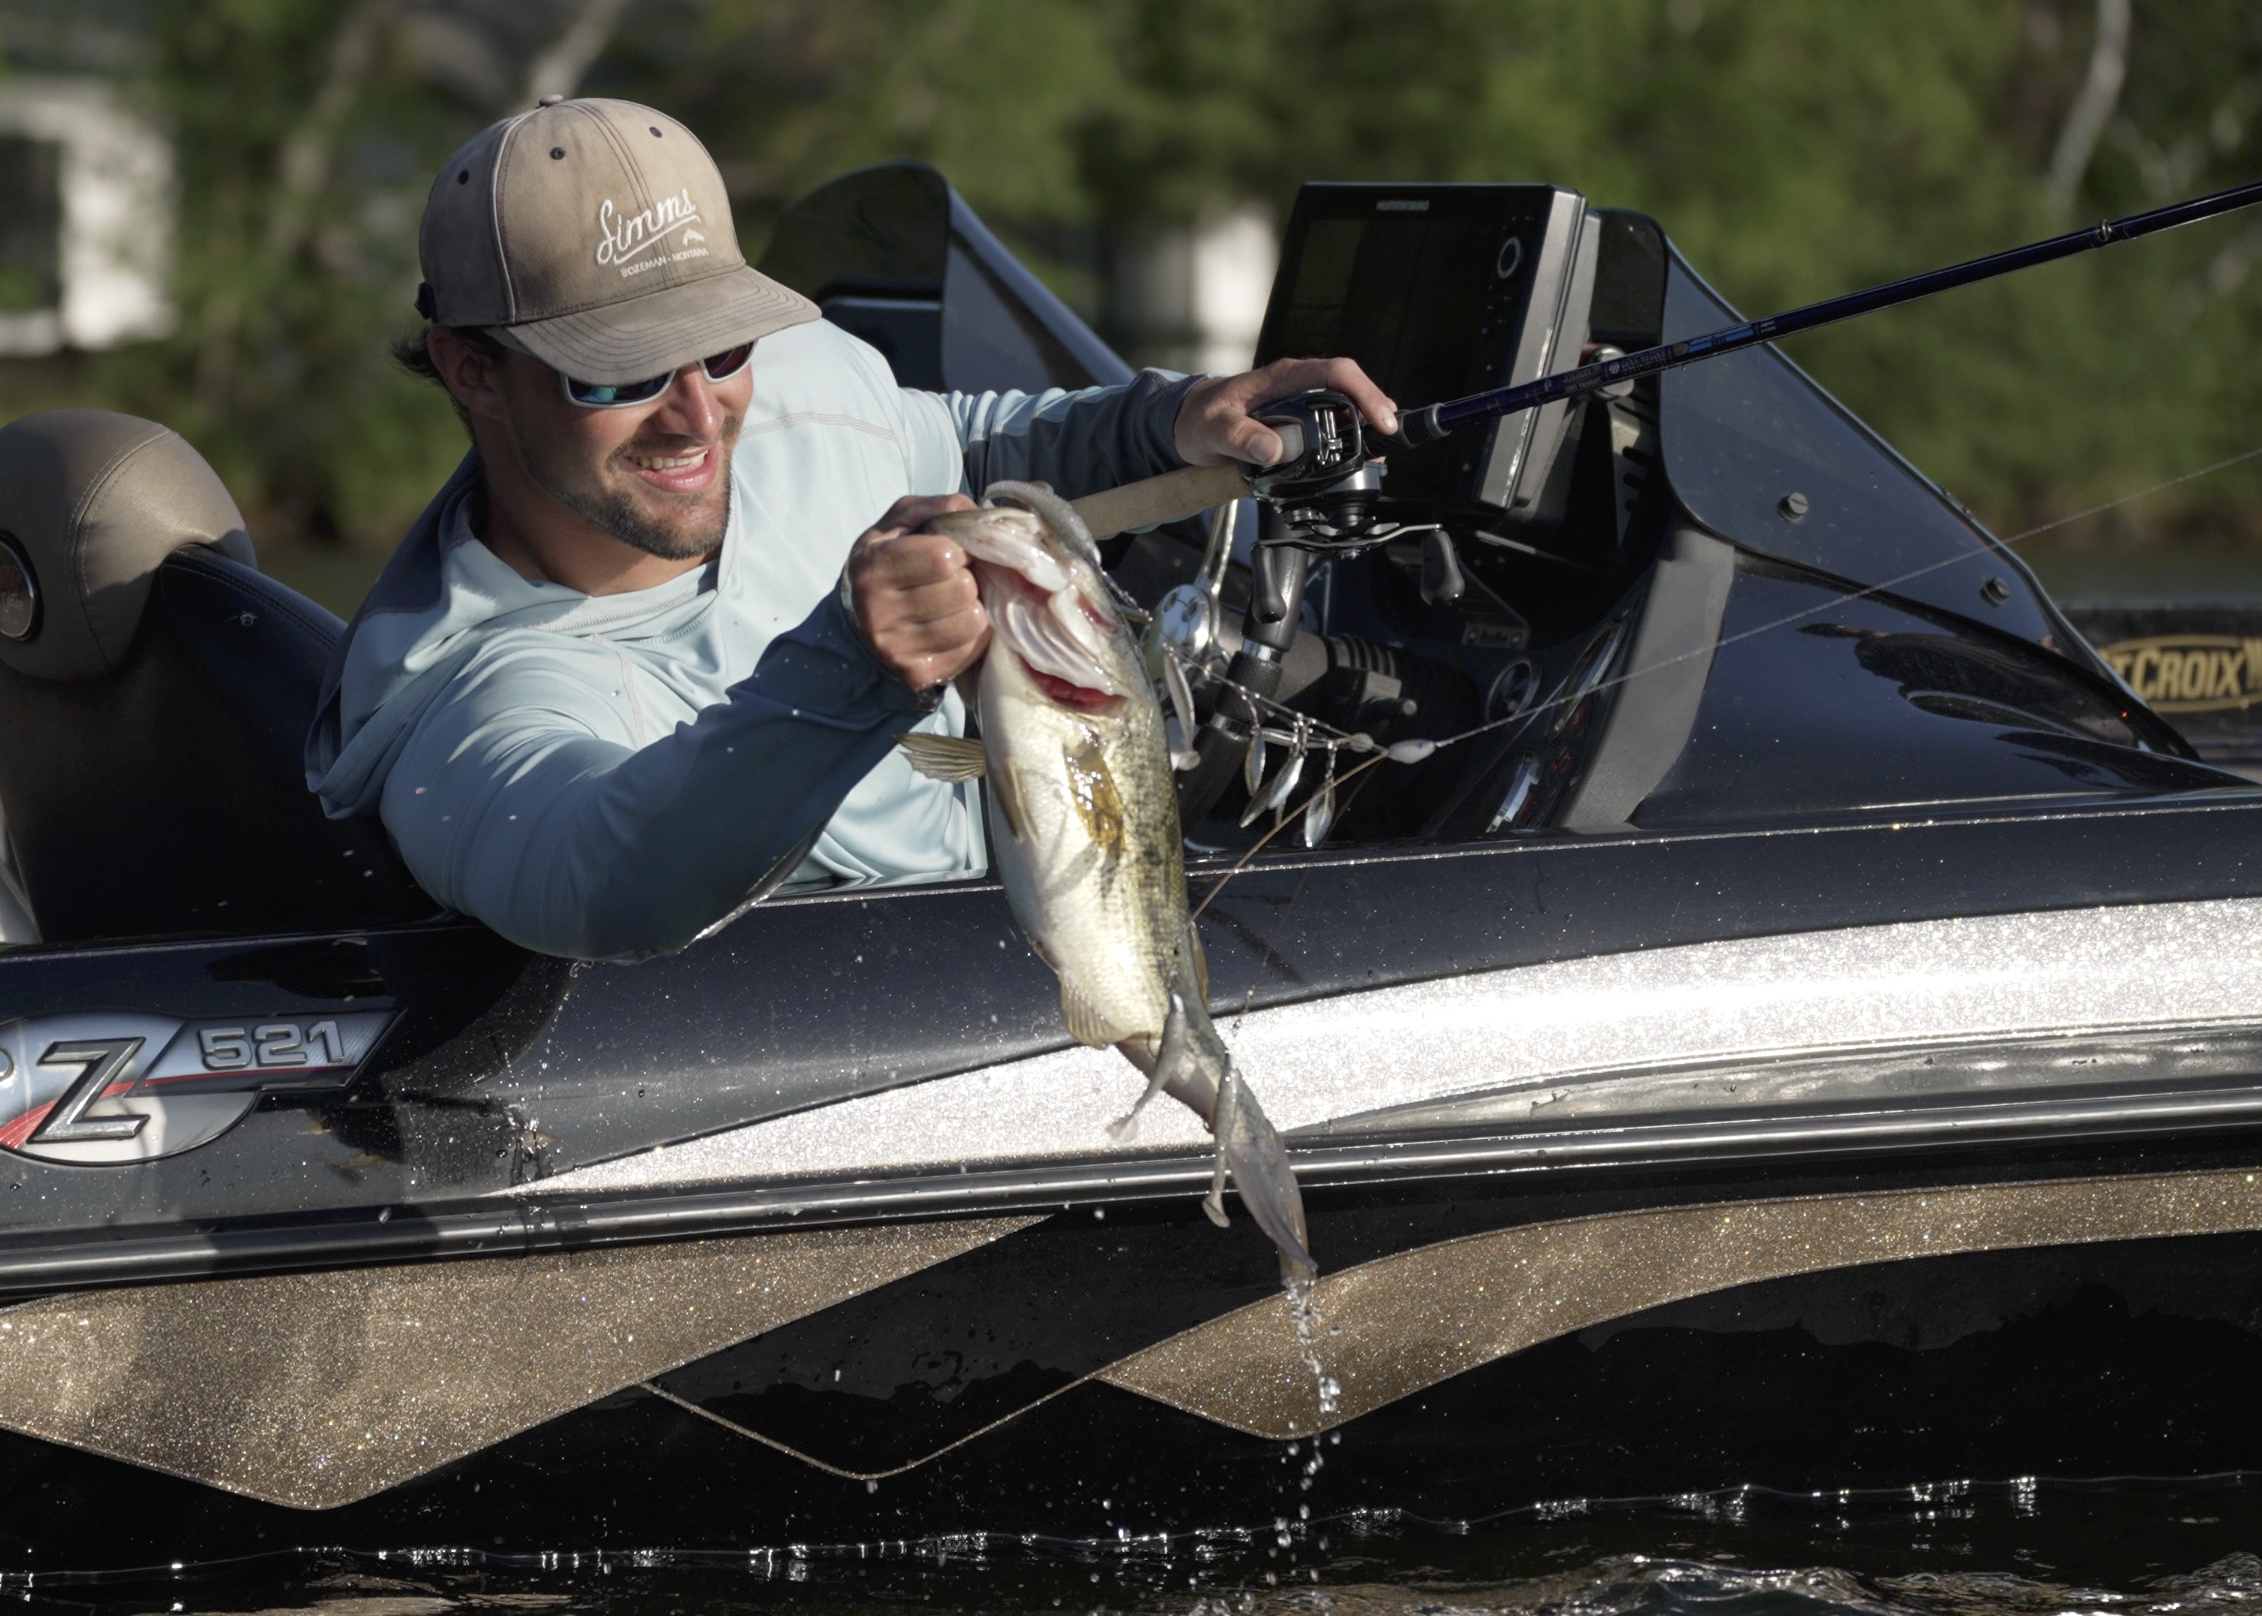 St. Croix X-Trek Freshwater Fishing Systems Offers Quality Combo